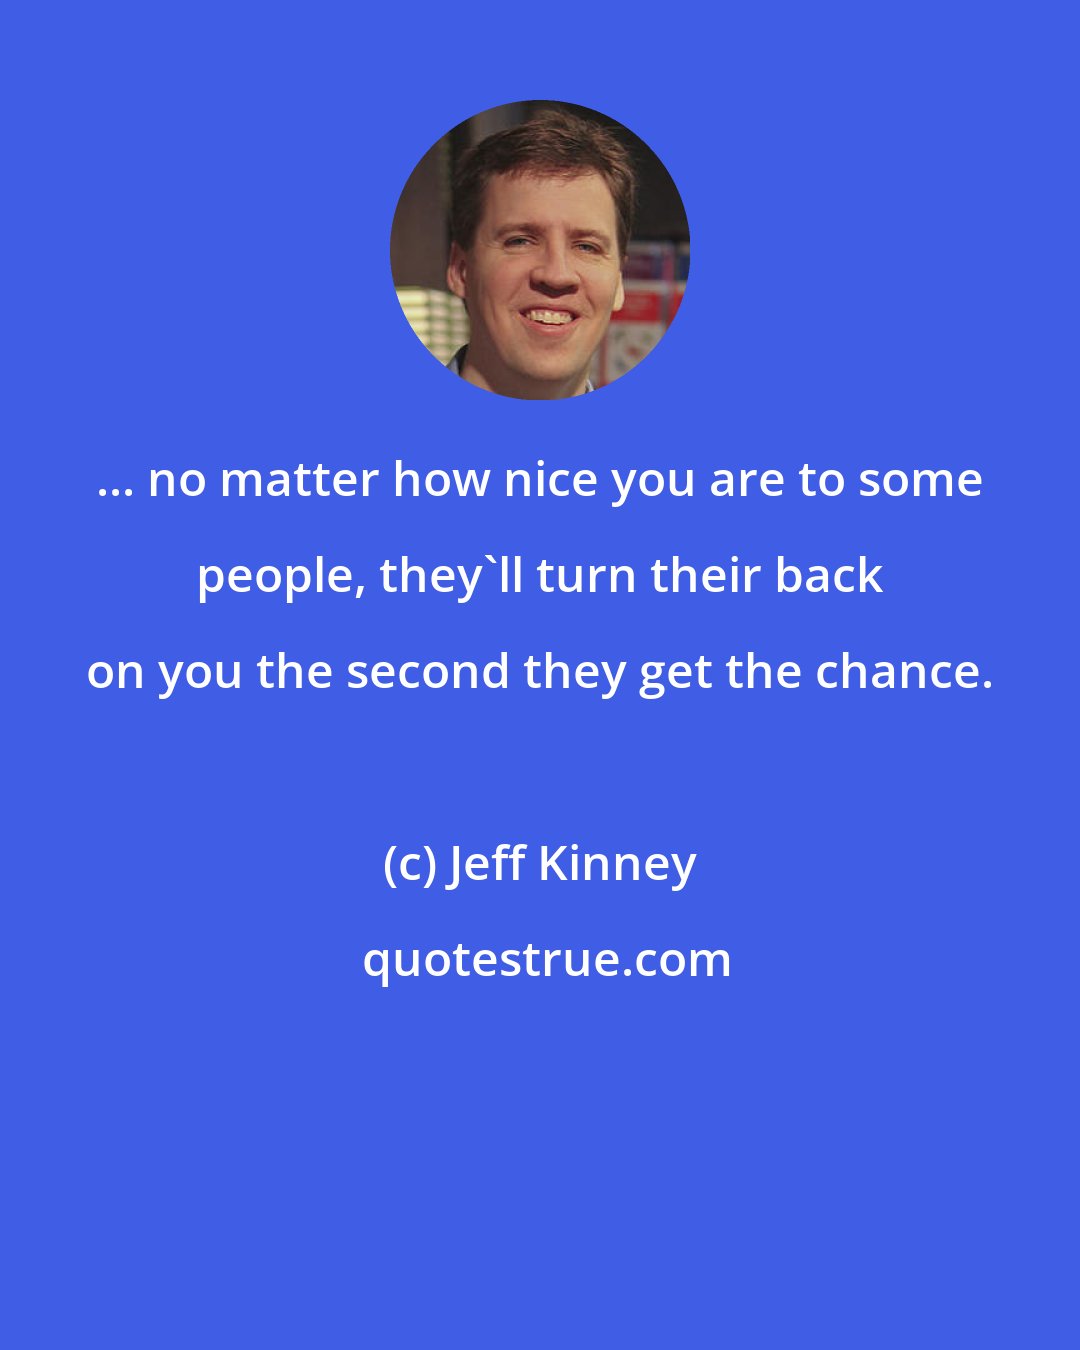 Jeff Kinney: ... no matter how nice you are to some people, they'll turn their back on you the second they get the chance.